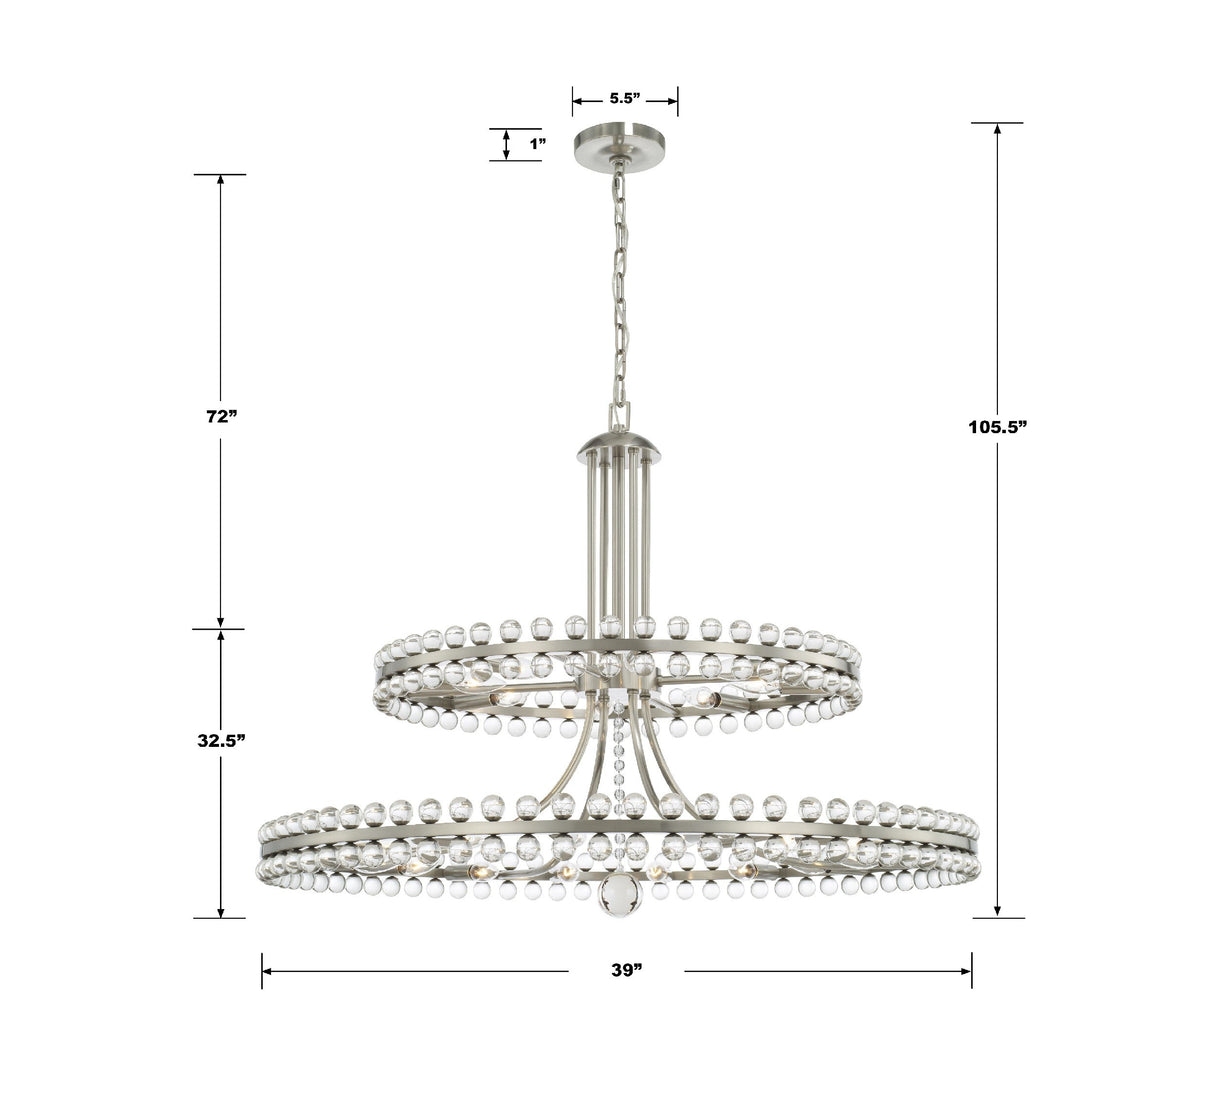 Clover 24 Light Aged Brass Two-tier Chandelier CLO-8890-AG